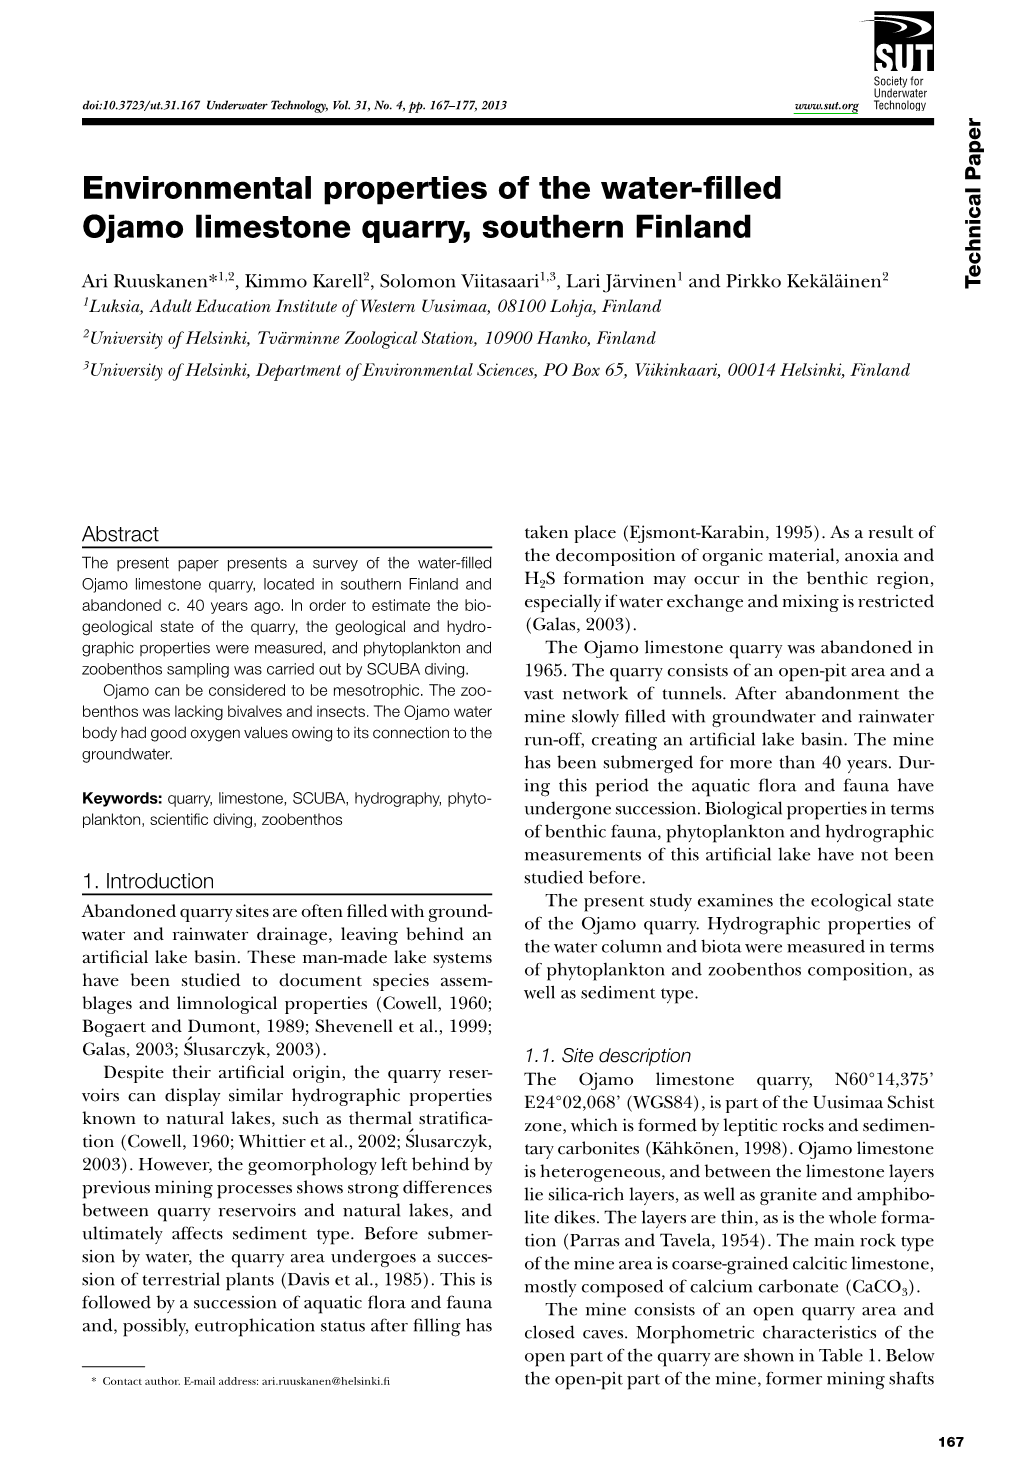 Environmental Properties of the Water-Filled Ojamo Limestone Quarry, Southern Finland